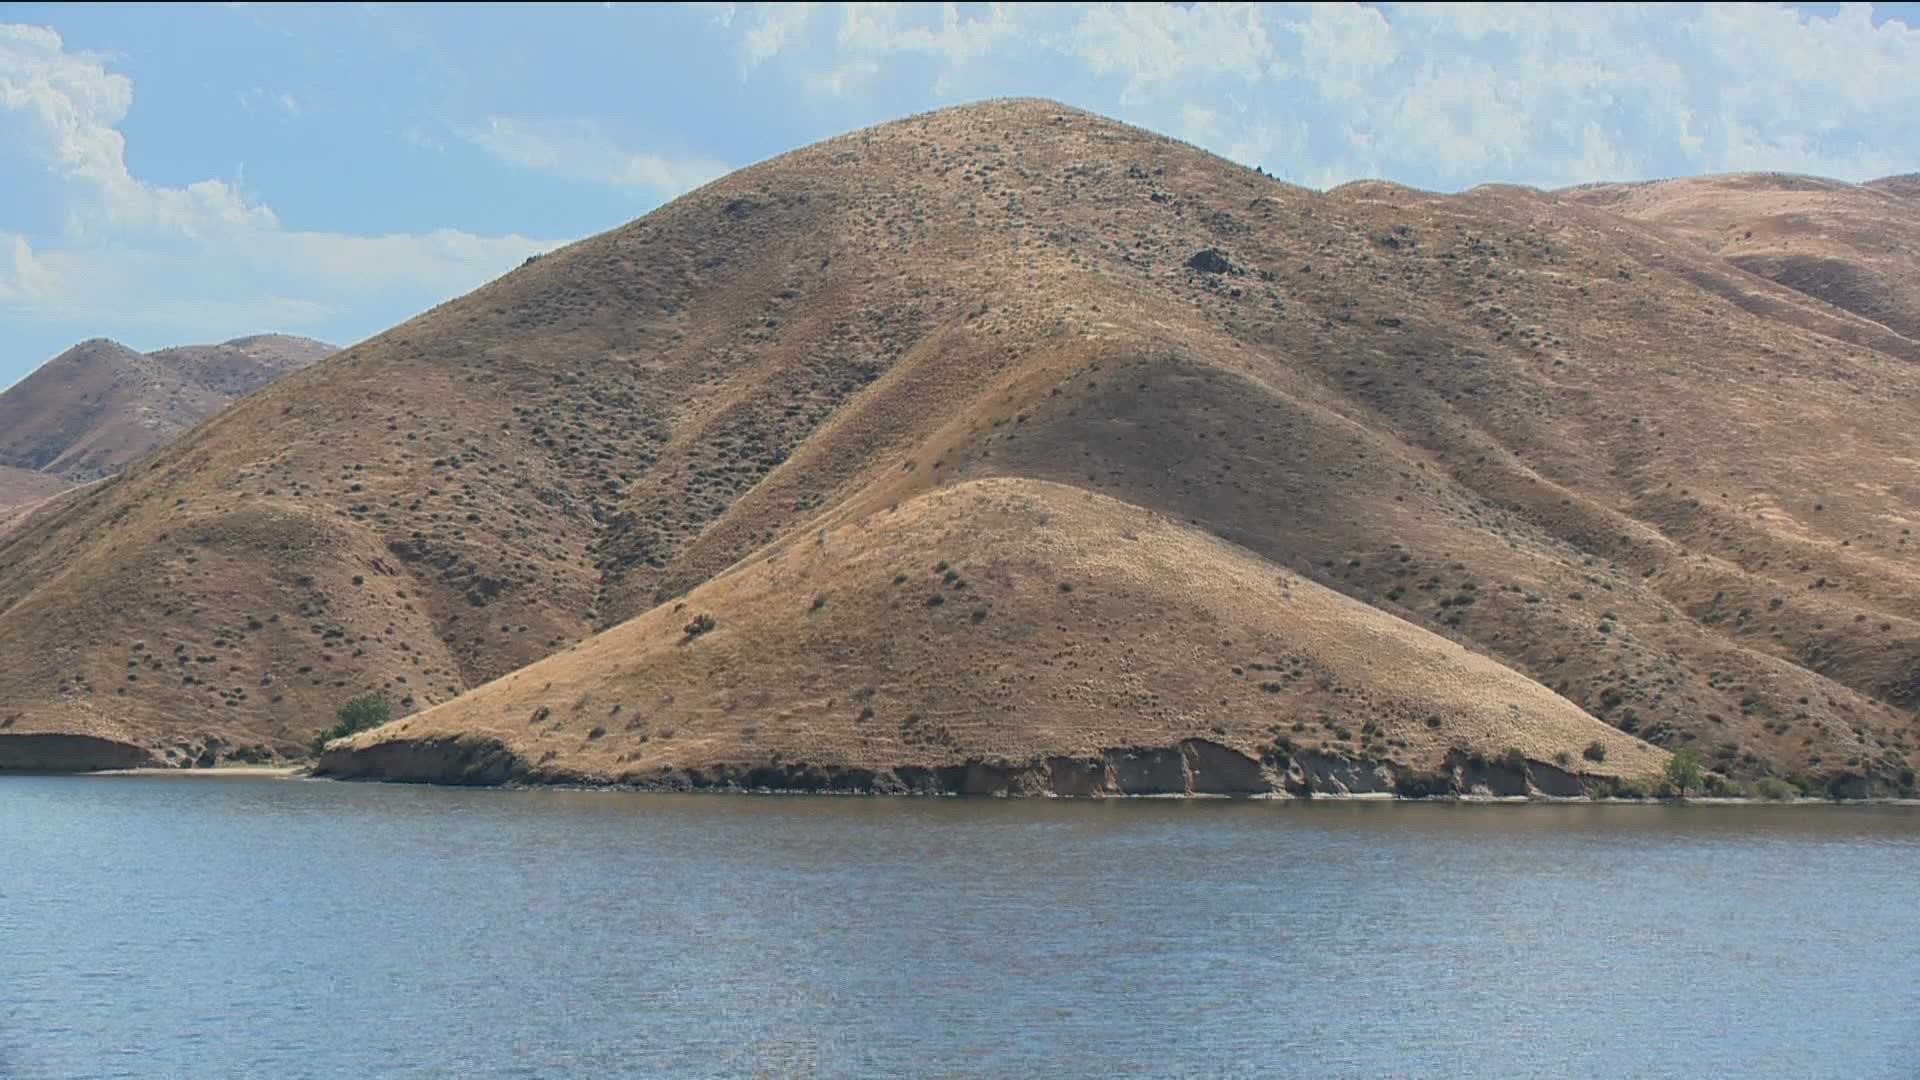 Starting Aug. 14, Lucky Peak will drop 1 to 3 feet per day until late September or early October, the U.S. Army Corps of Engineers announced Friday.